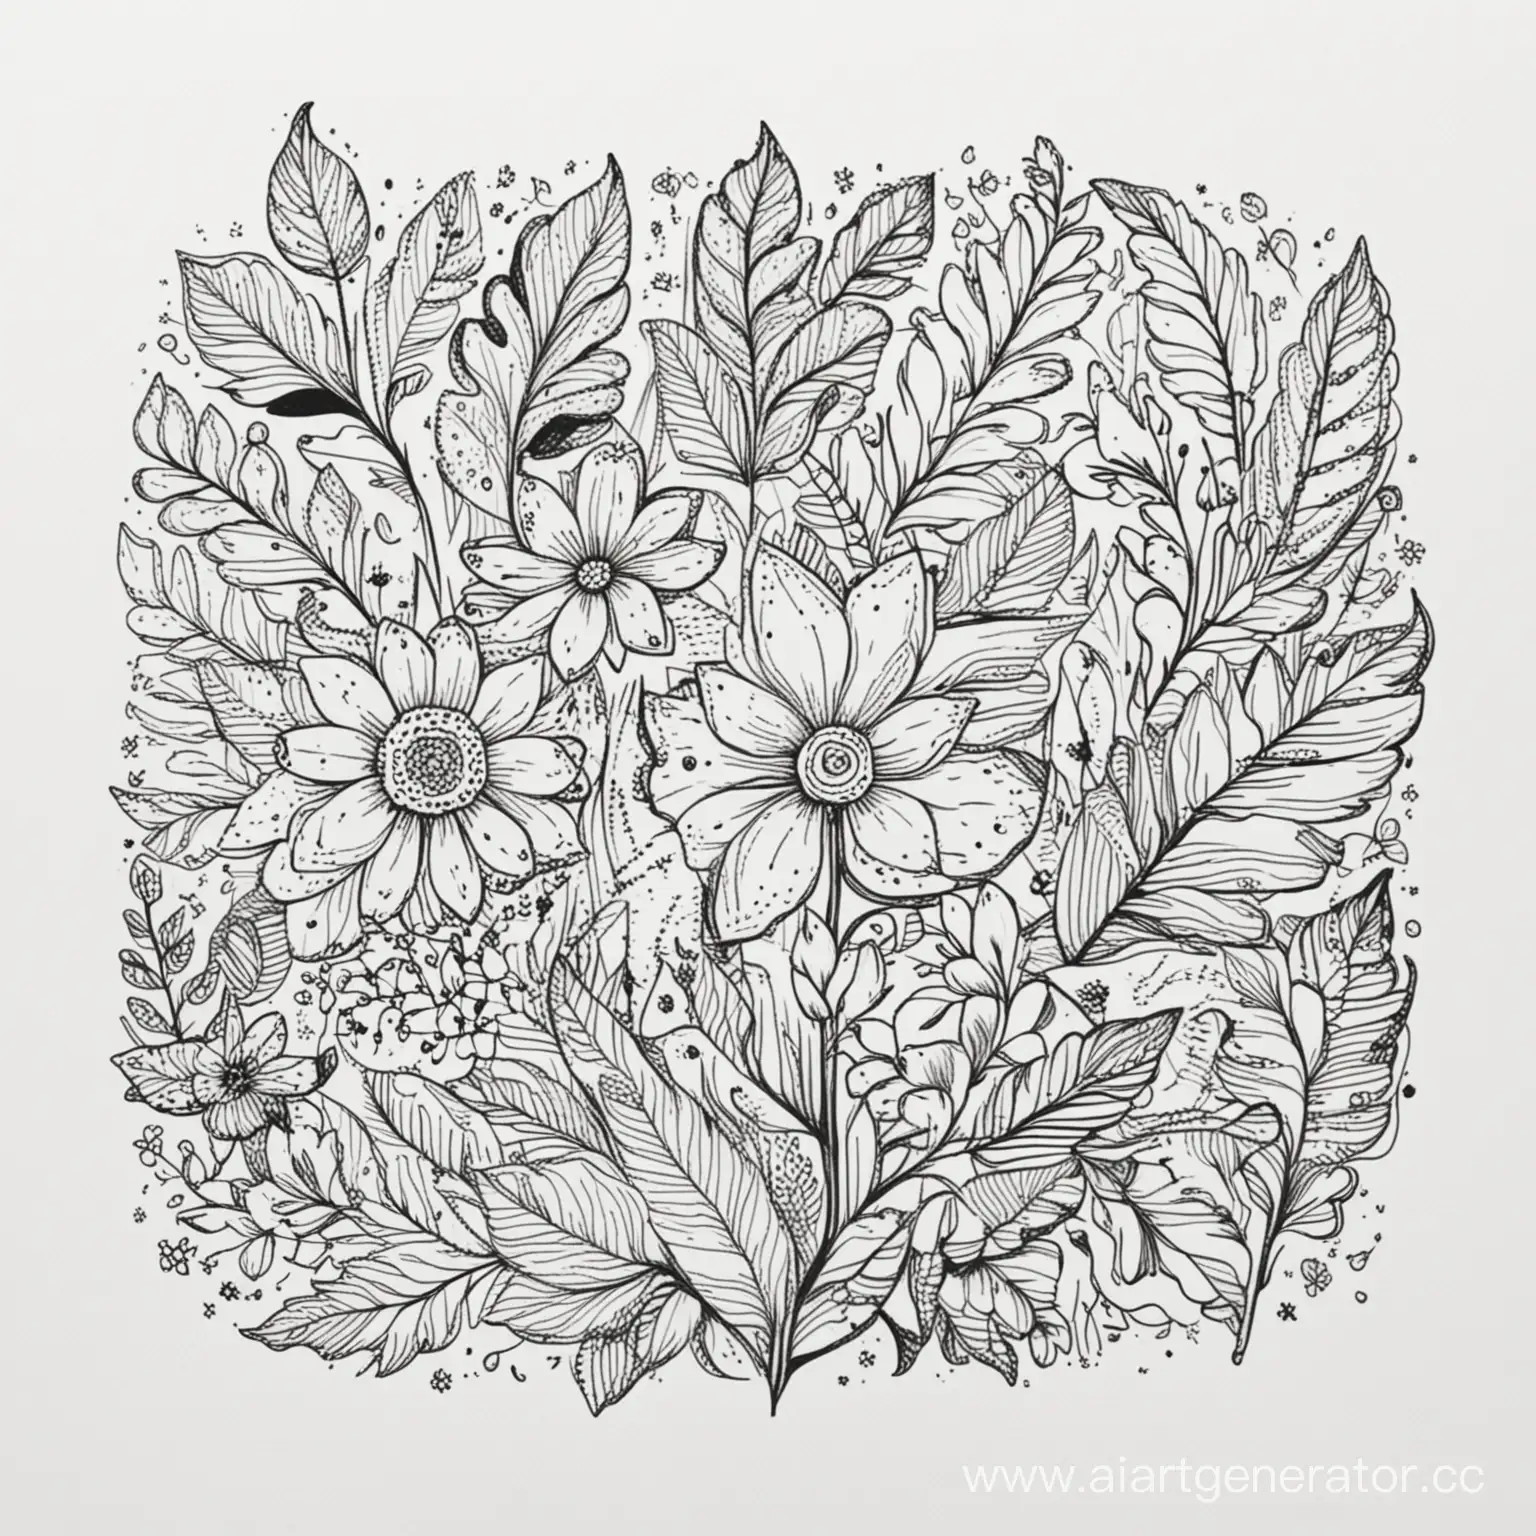 Doodle-Style-Floral-Line-Art-on-White-Background